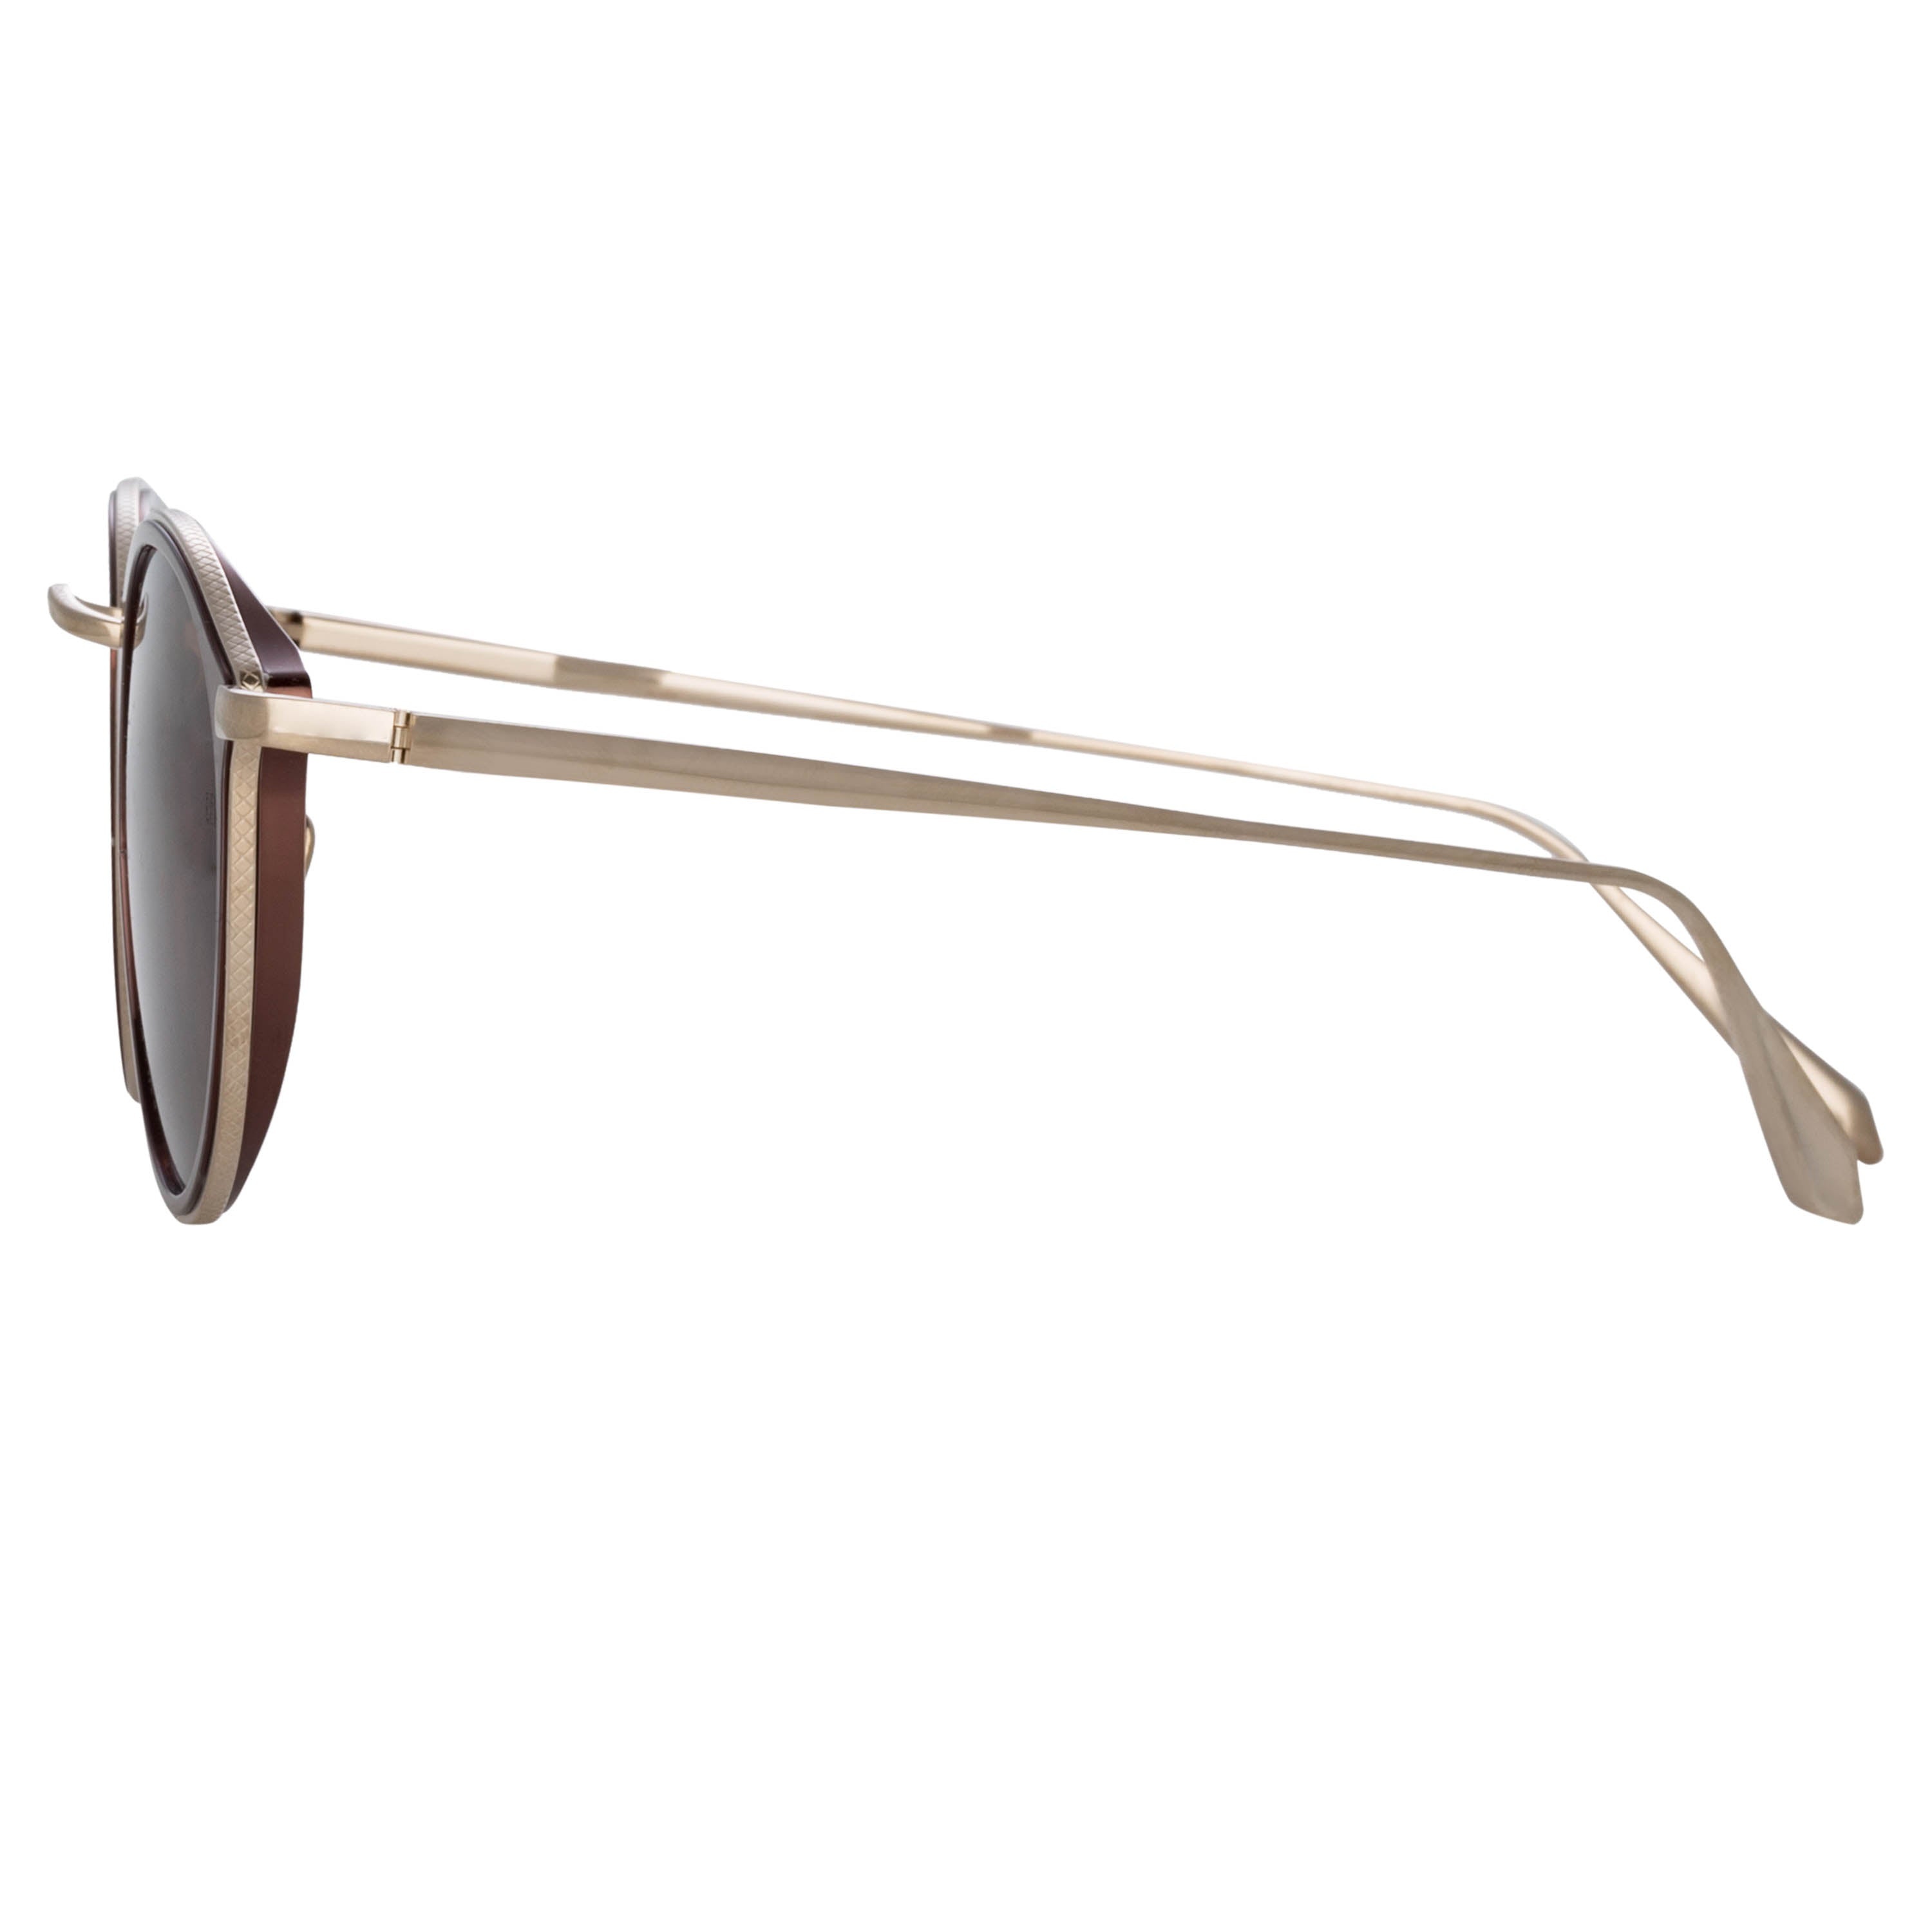 LUIS OVAL SUNGLASSES IN LIGHT GOLD AND BROWN - 4